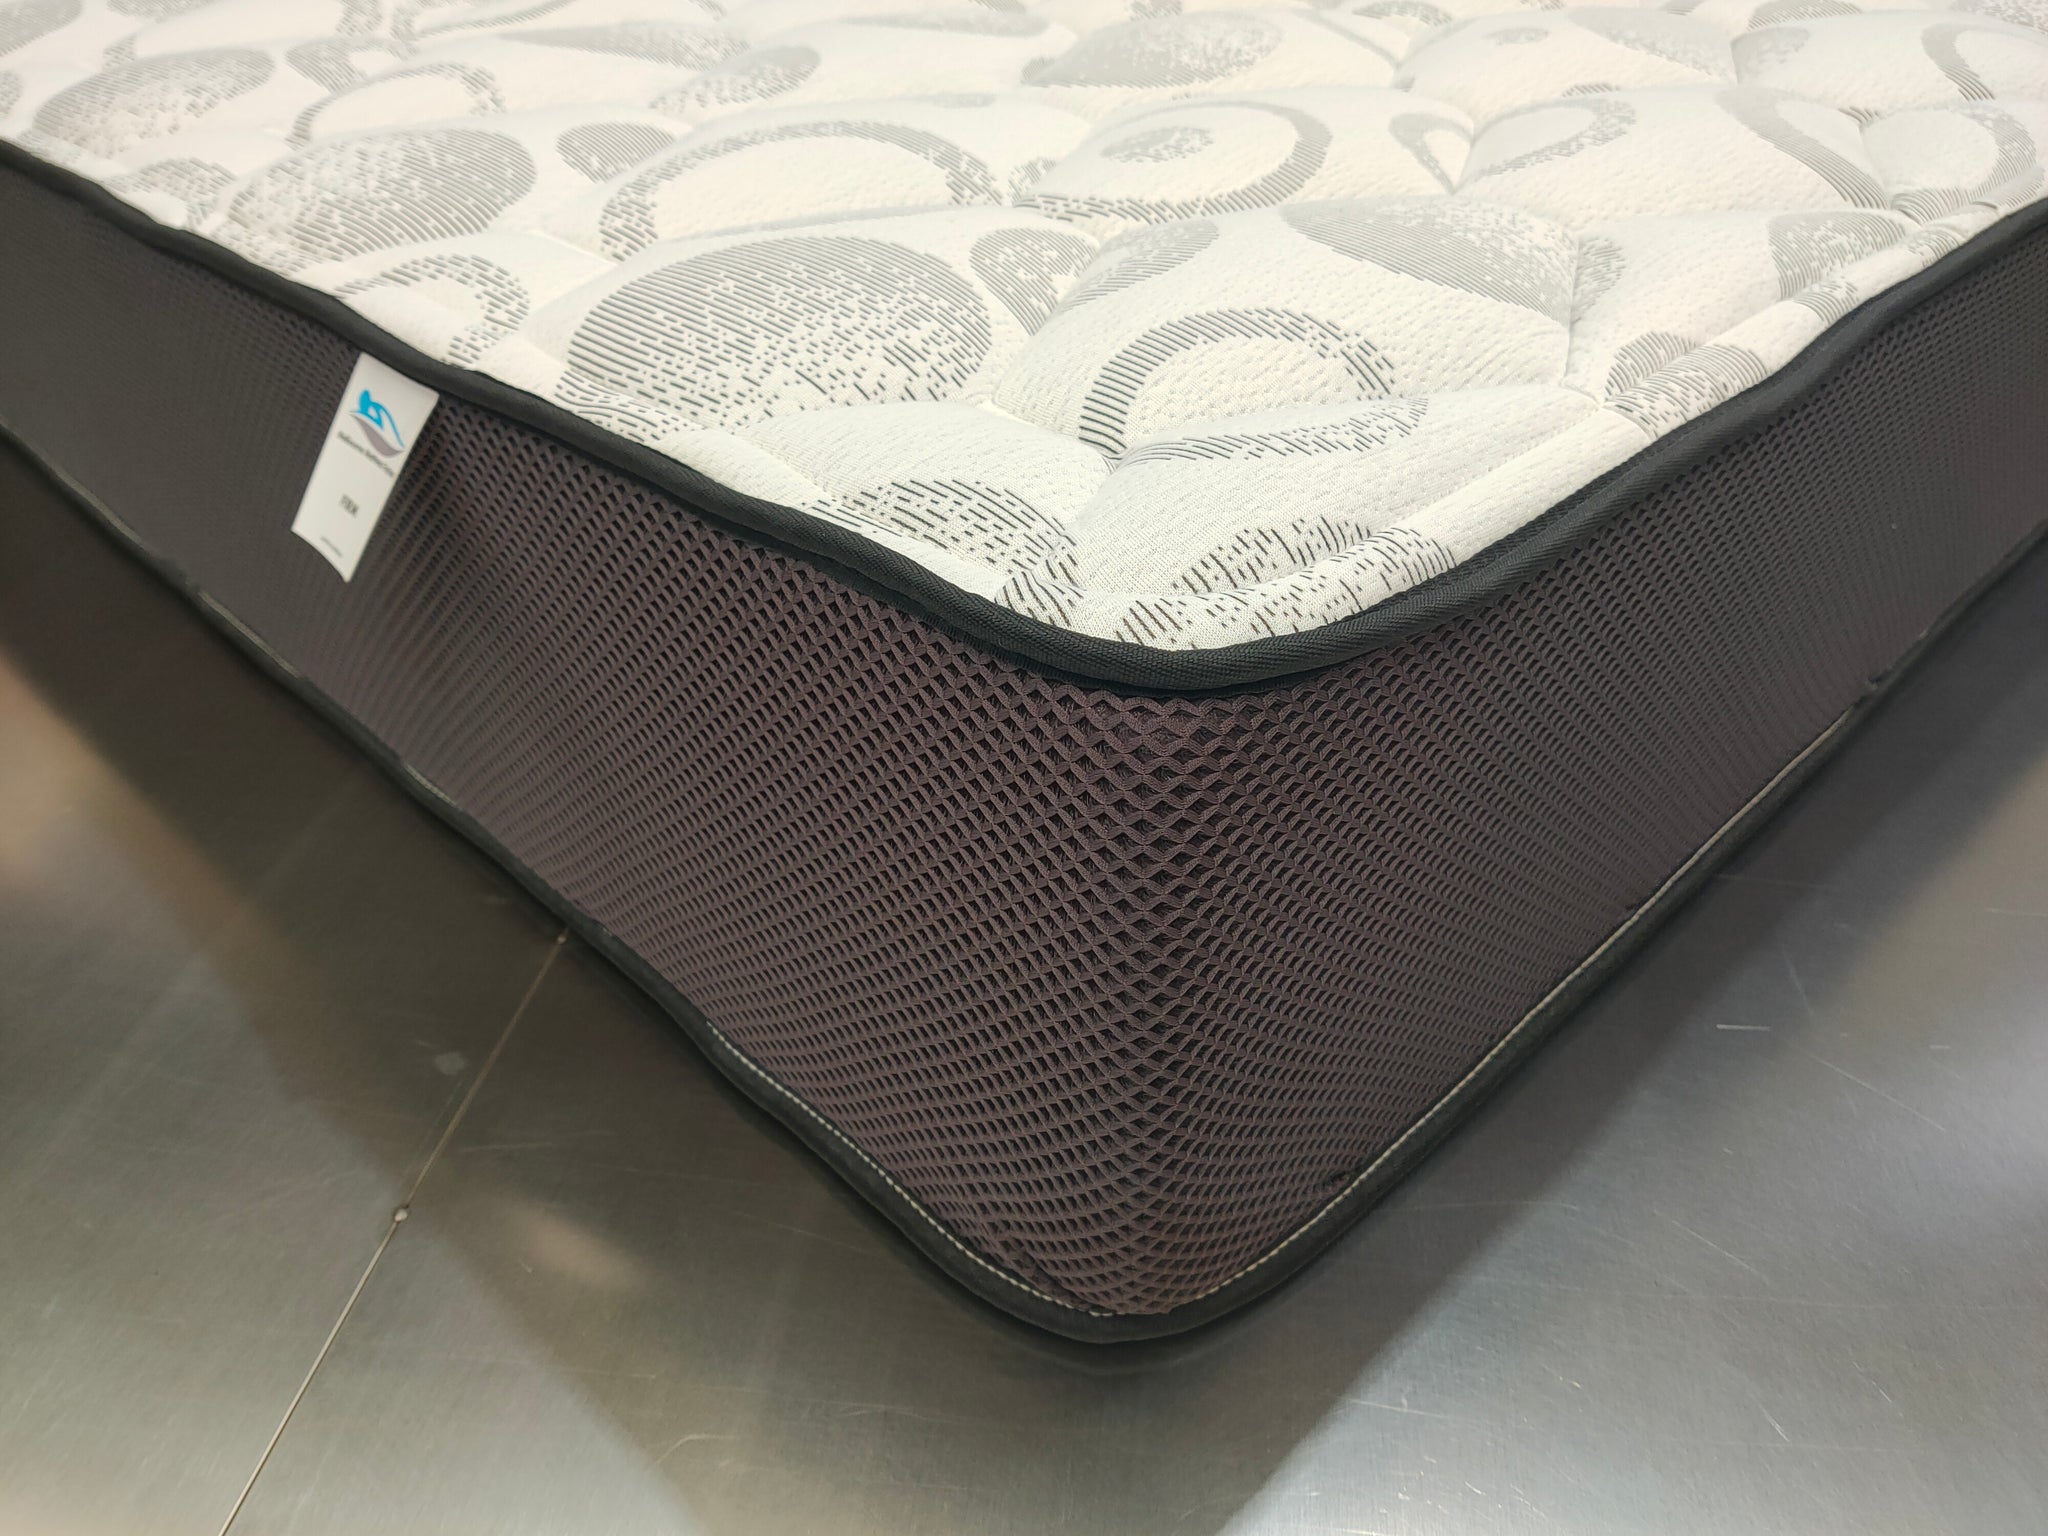 THE HARD ROCK QUEEN -  Australian Made - 15 Year Warranty - Free Delivery* - Melbourne Mattress Factory